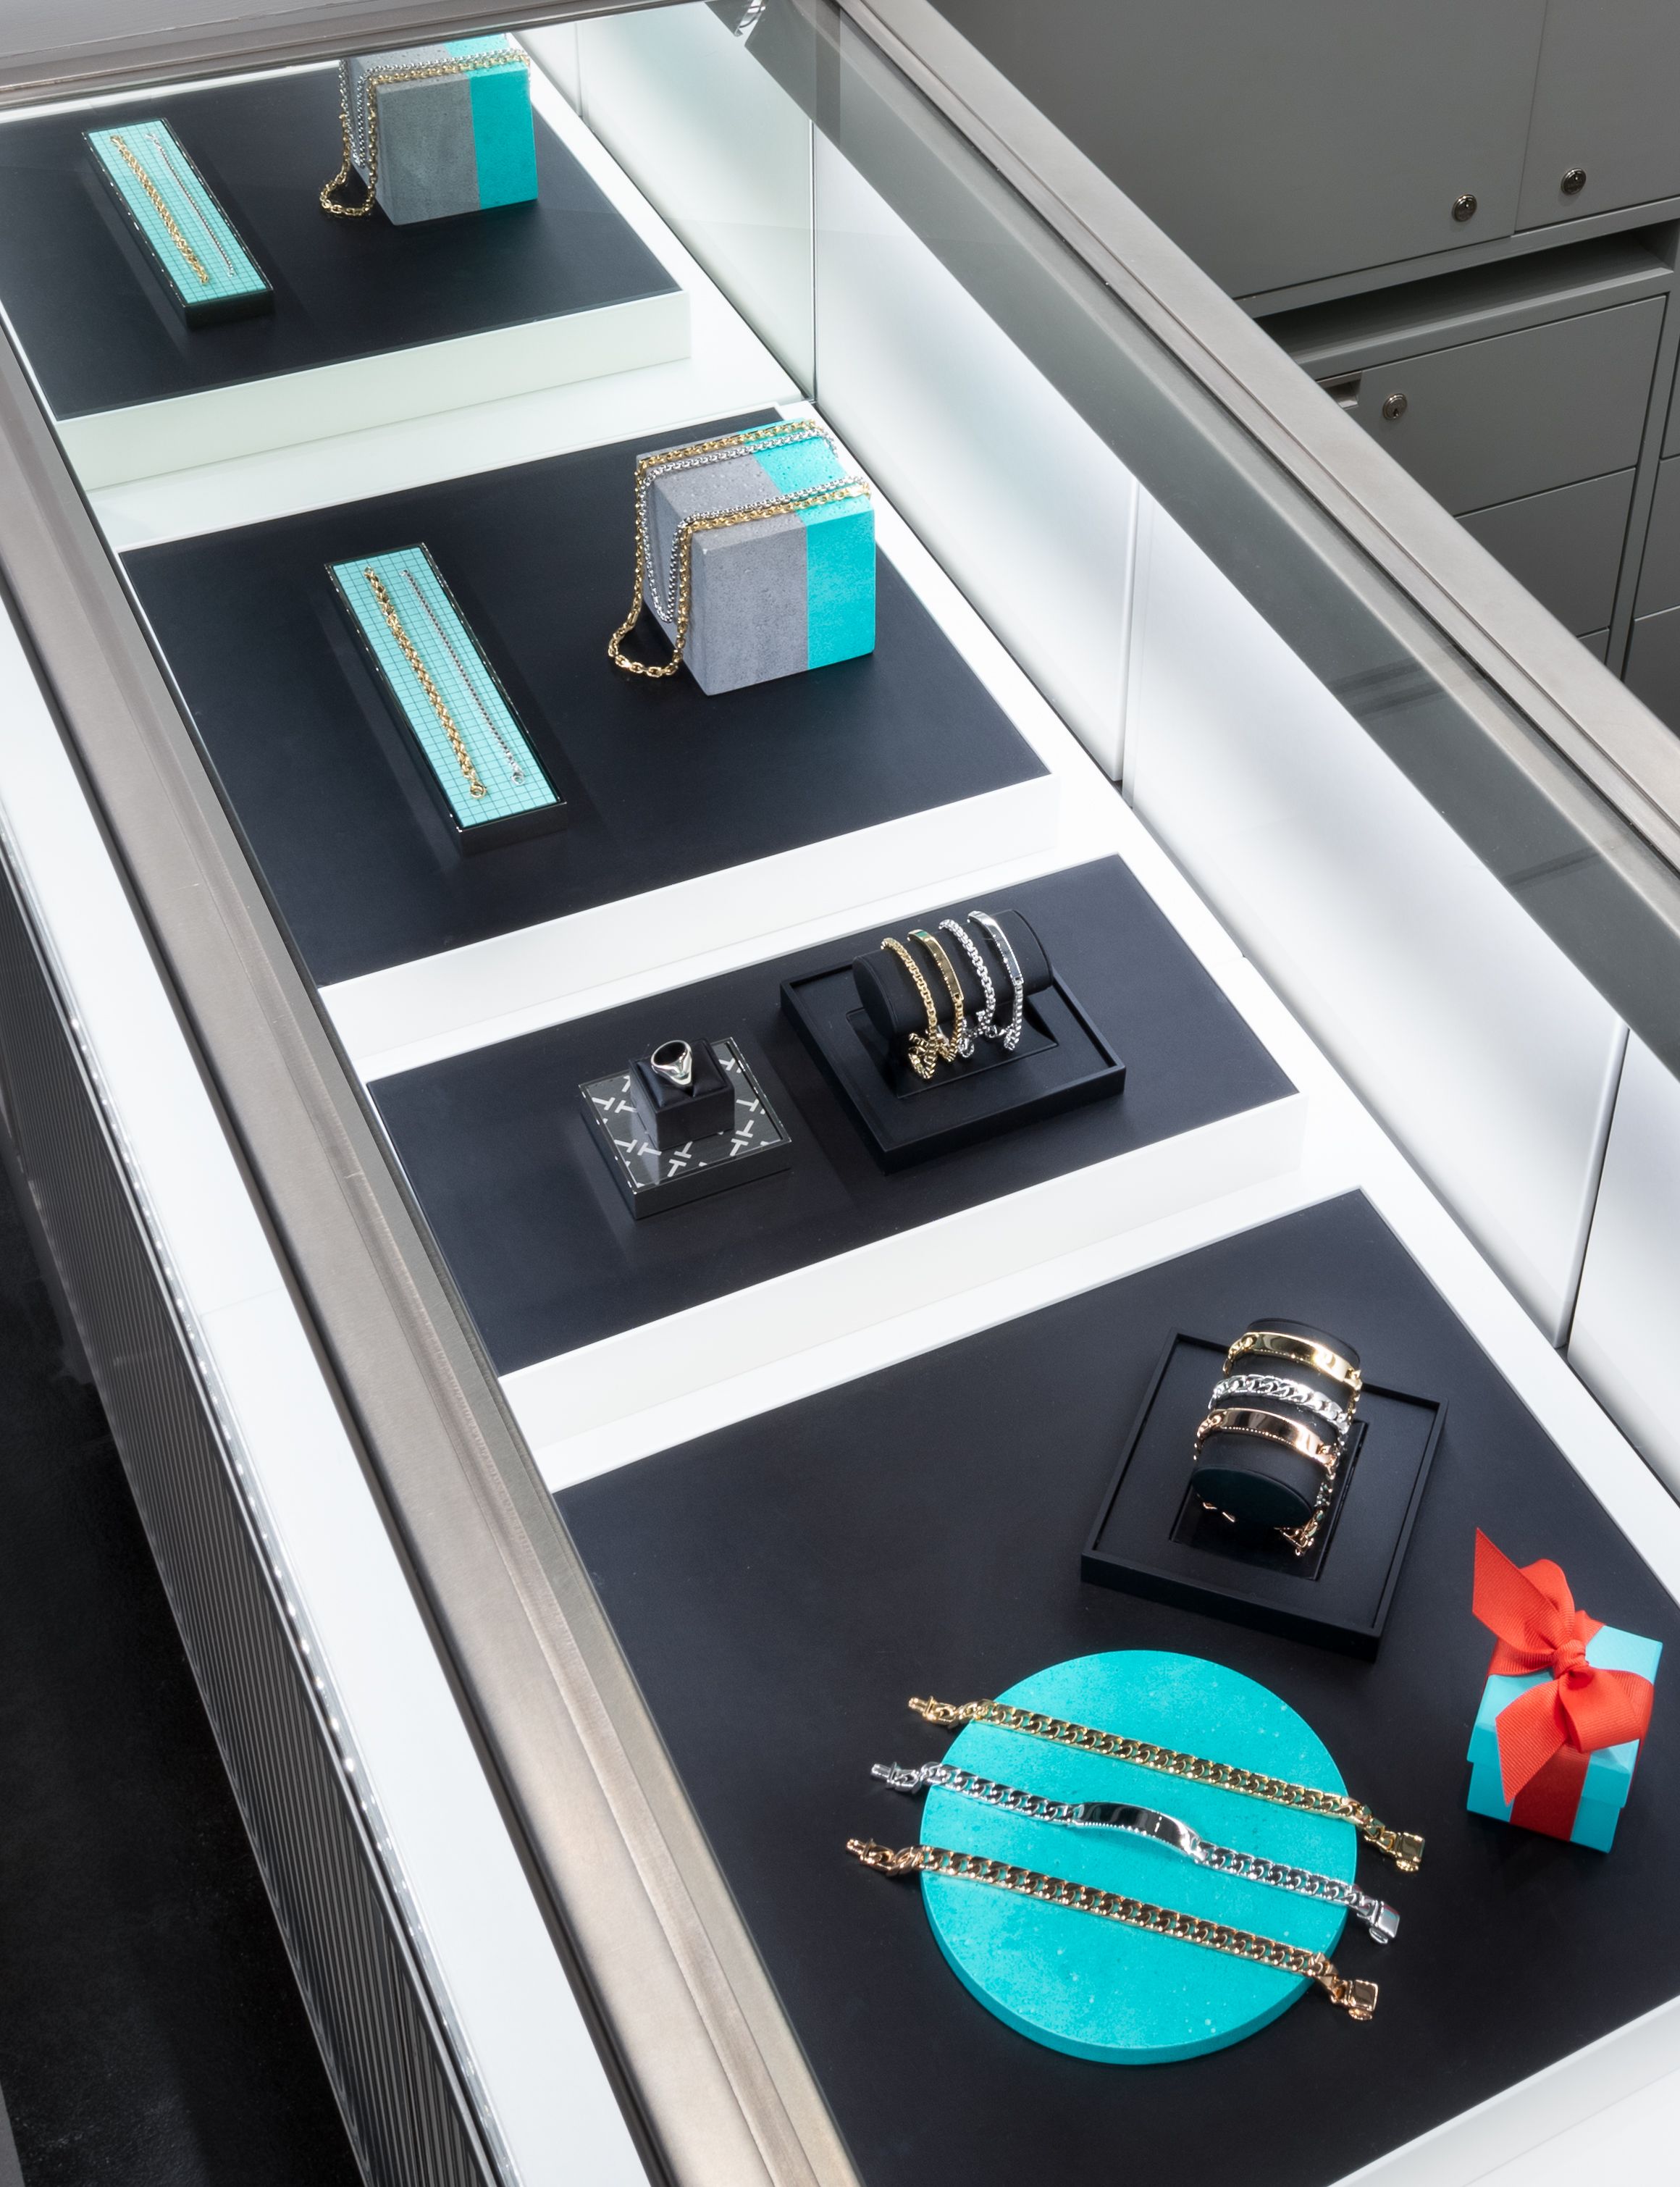 Tiffany and Co. Opens First Pop-Up Shop at The Grove – The